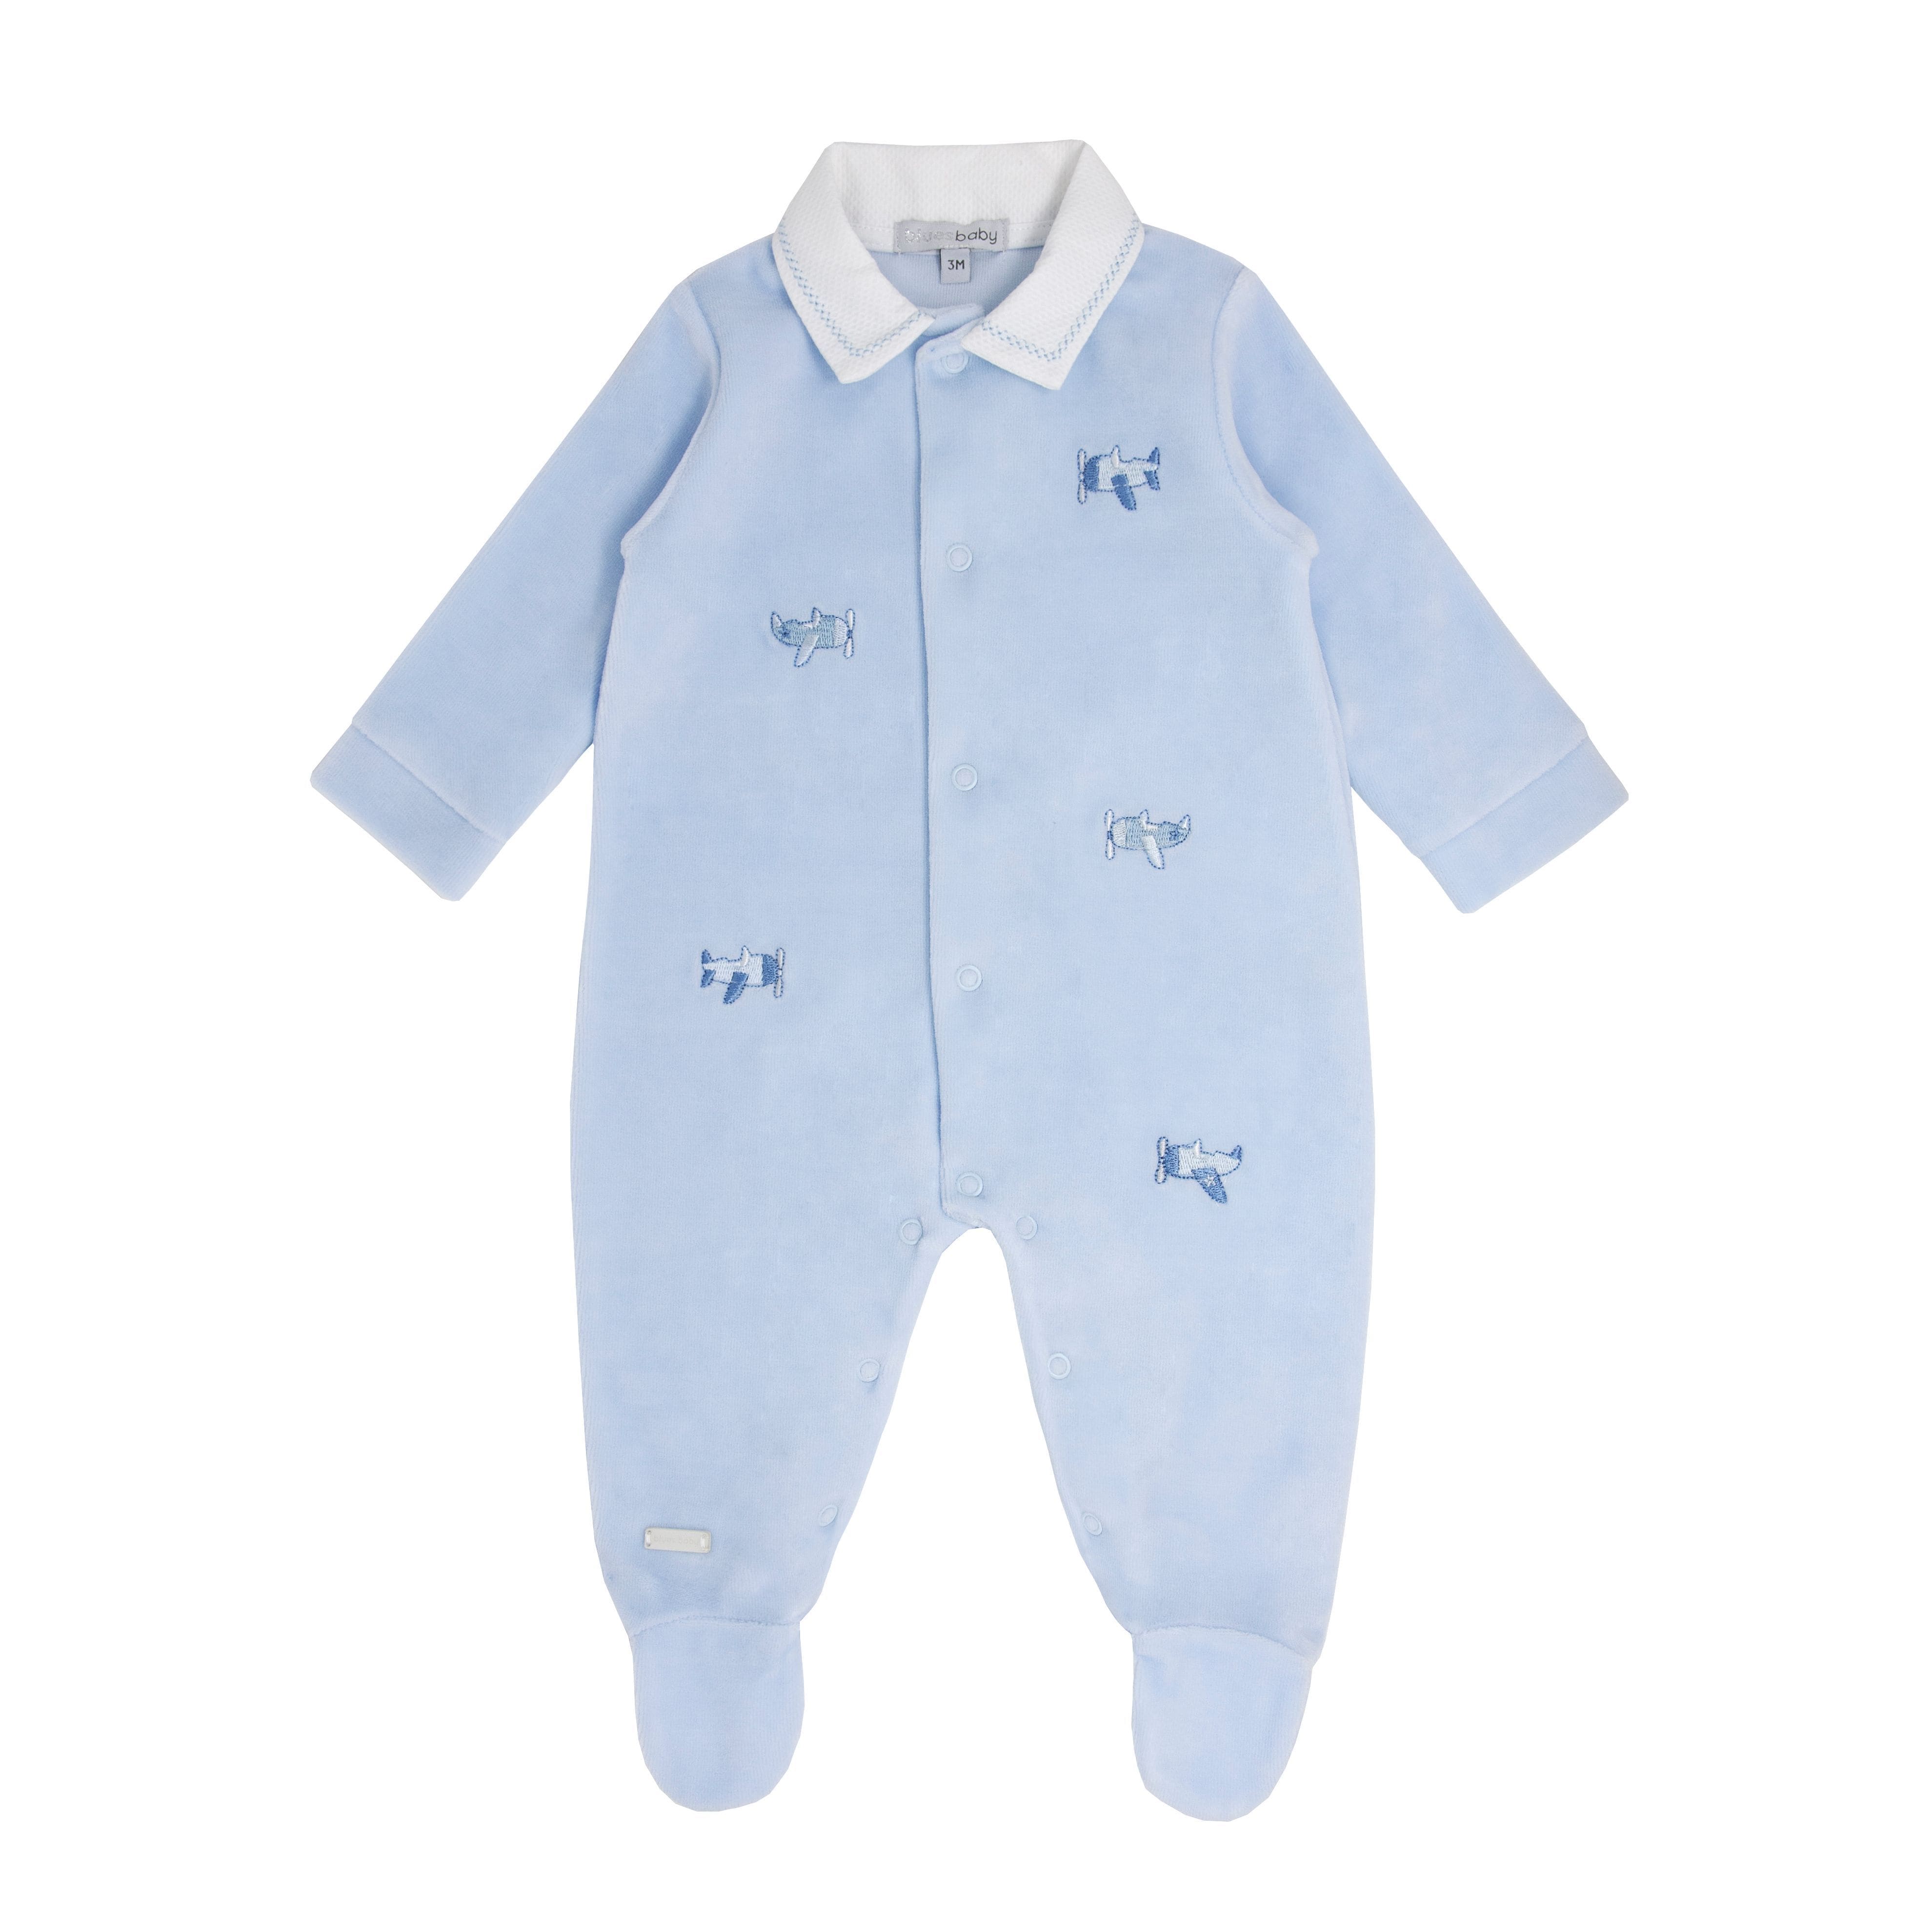 BLUES BABY - Plane Embroidered Velour Babygrow - Blue